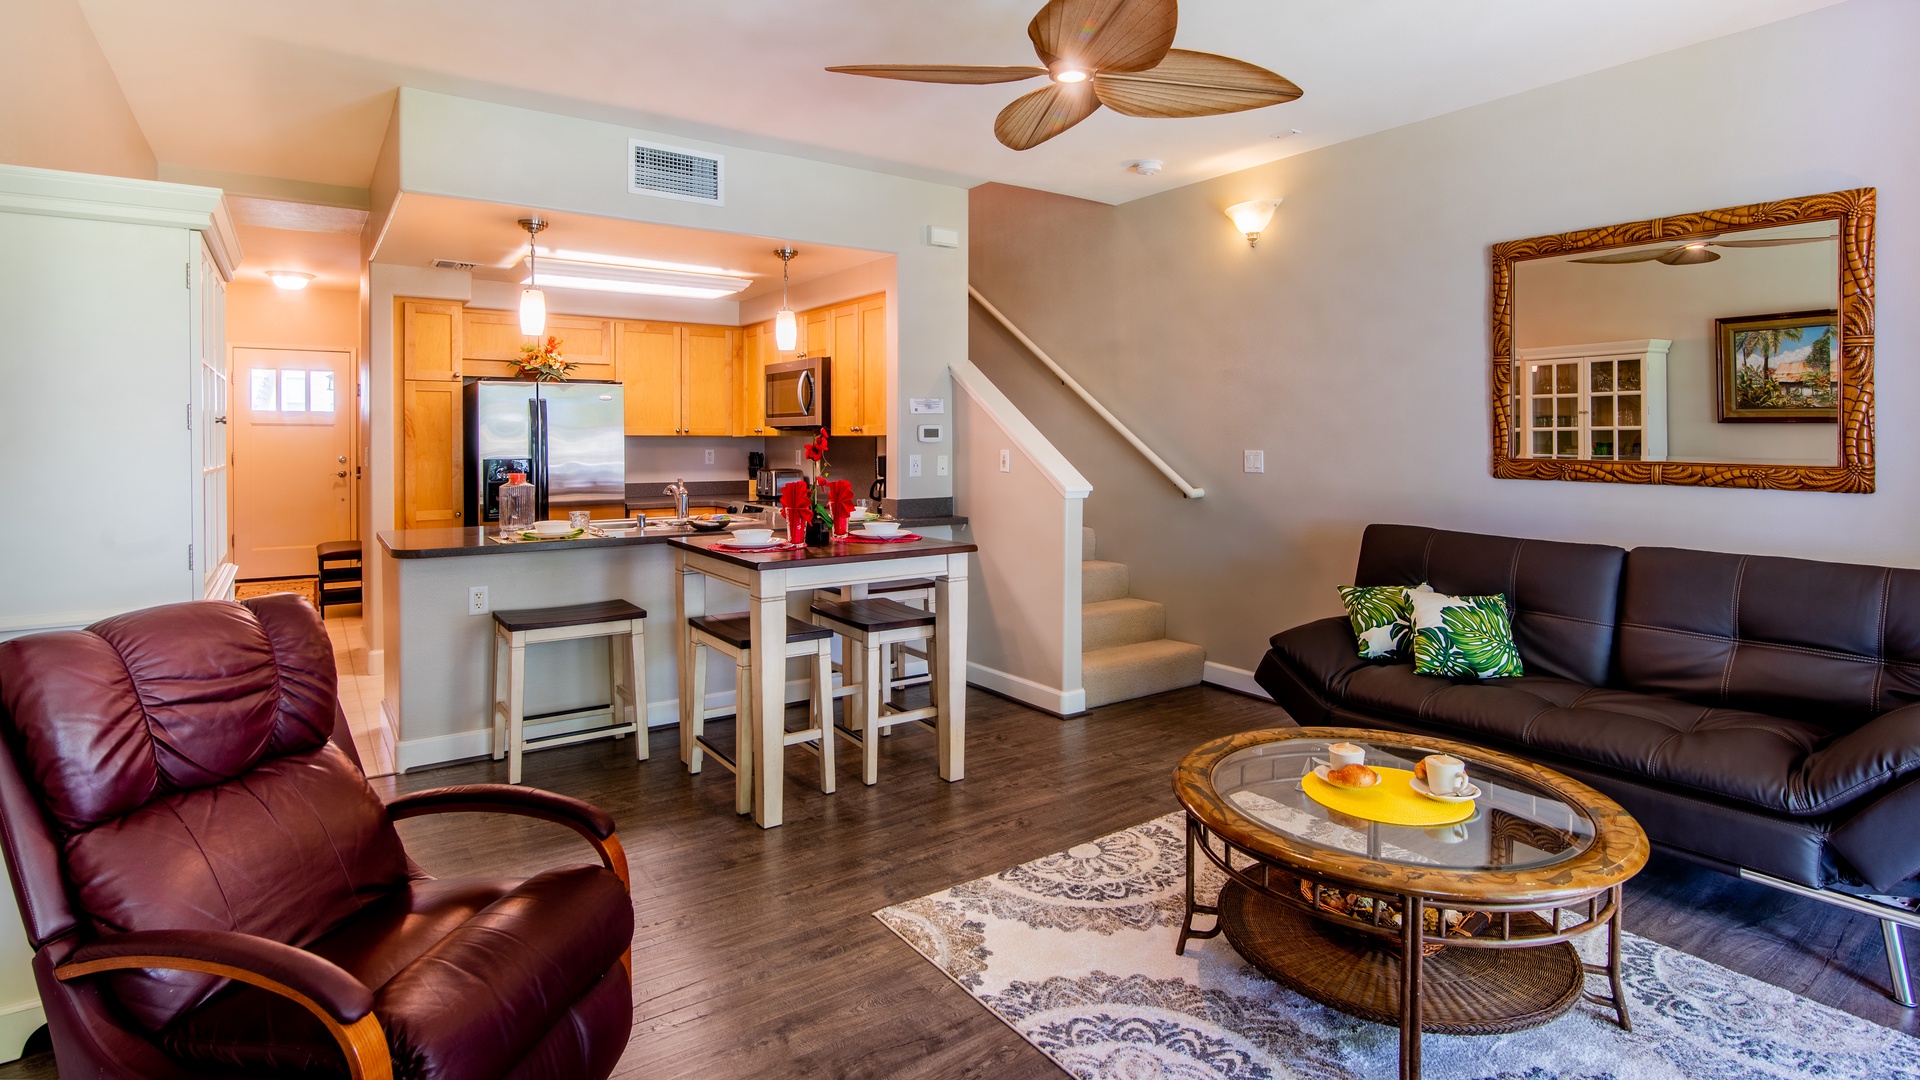 Kapolei Vacation Rentals, Hillside Villas 1538-2 - An open floor plan with kitchen, dining and living areas.